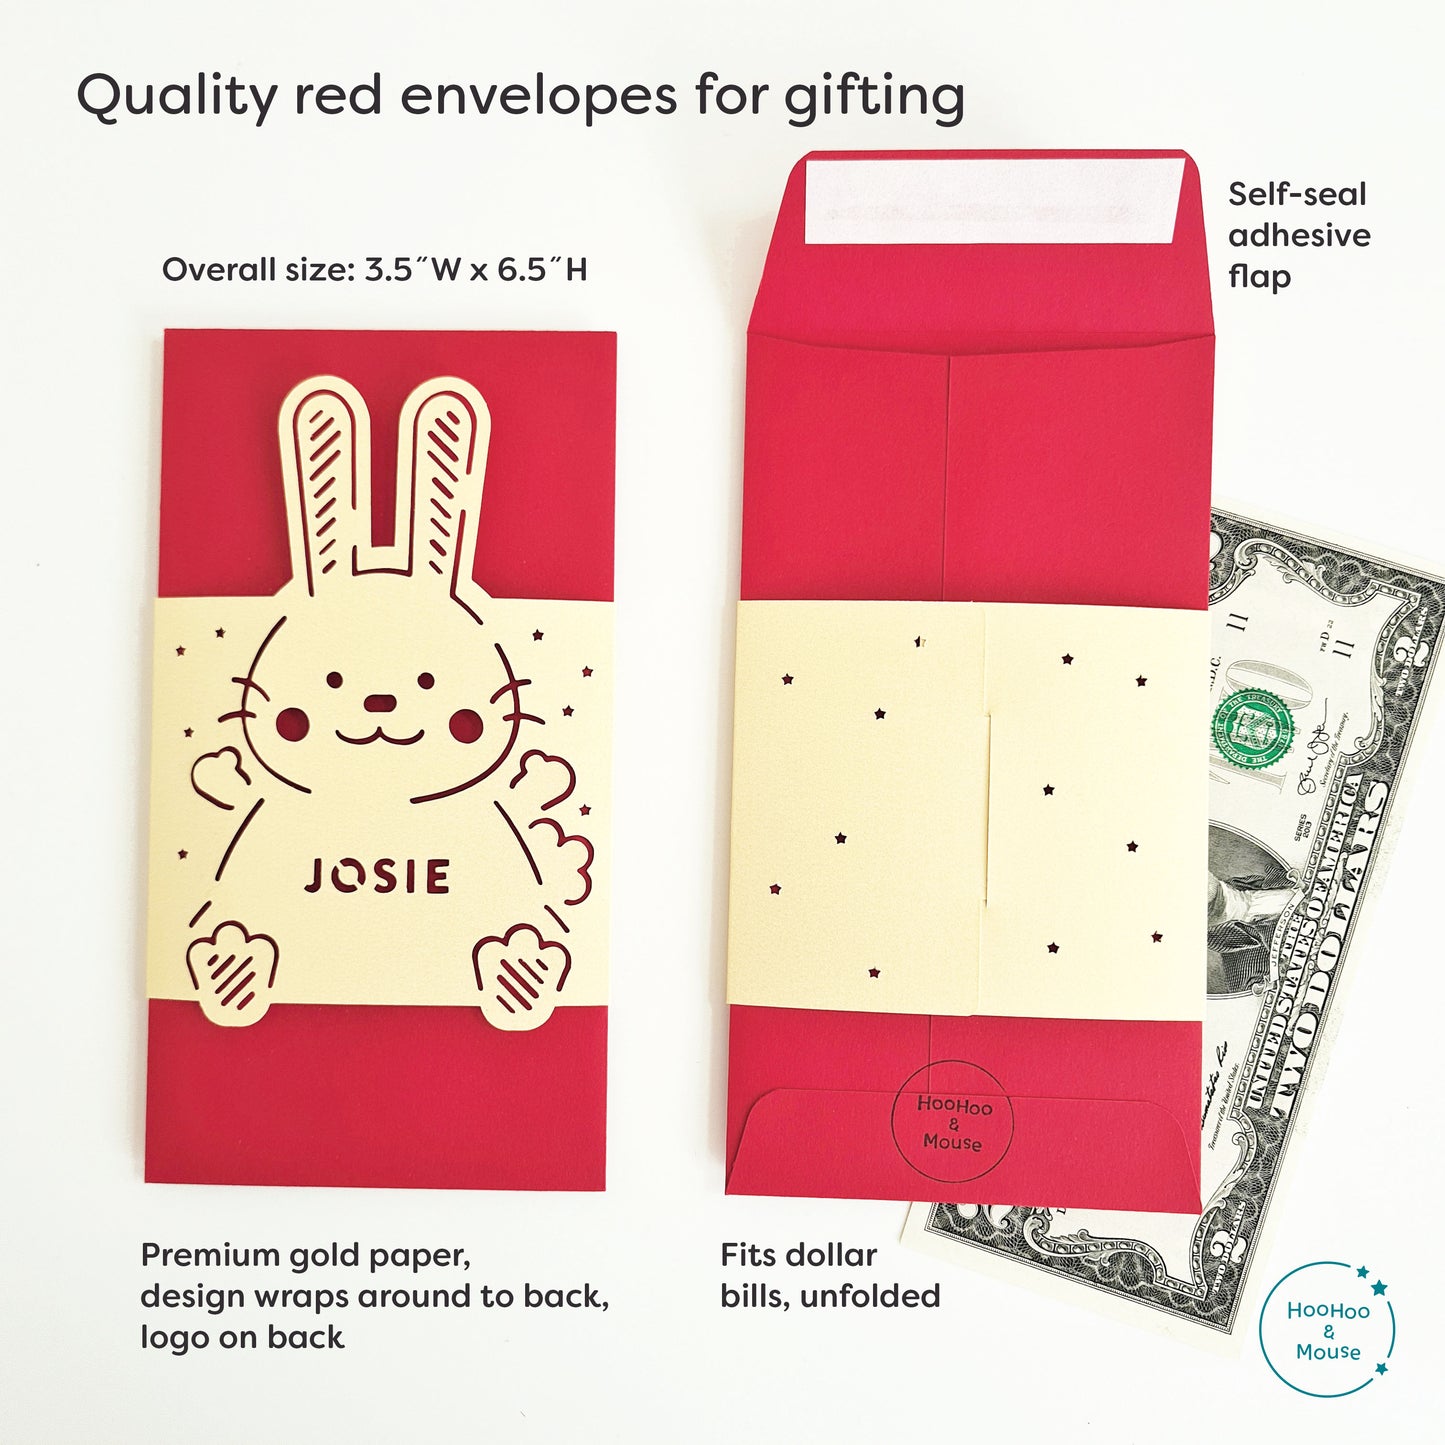 2023 Year of the Rabbit Red Envelope, personalized